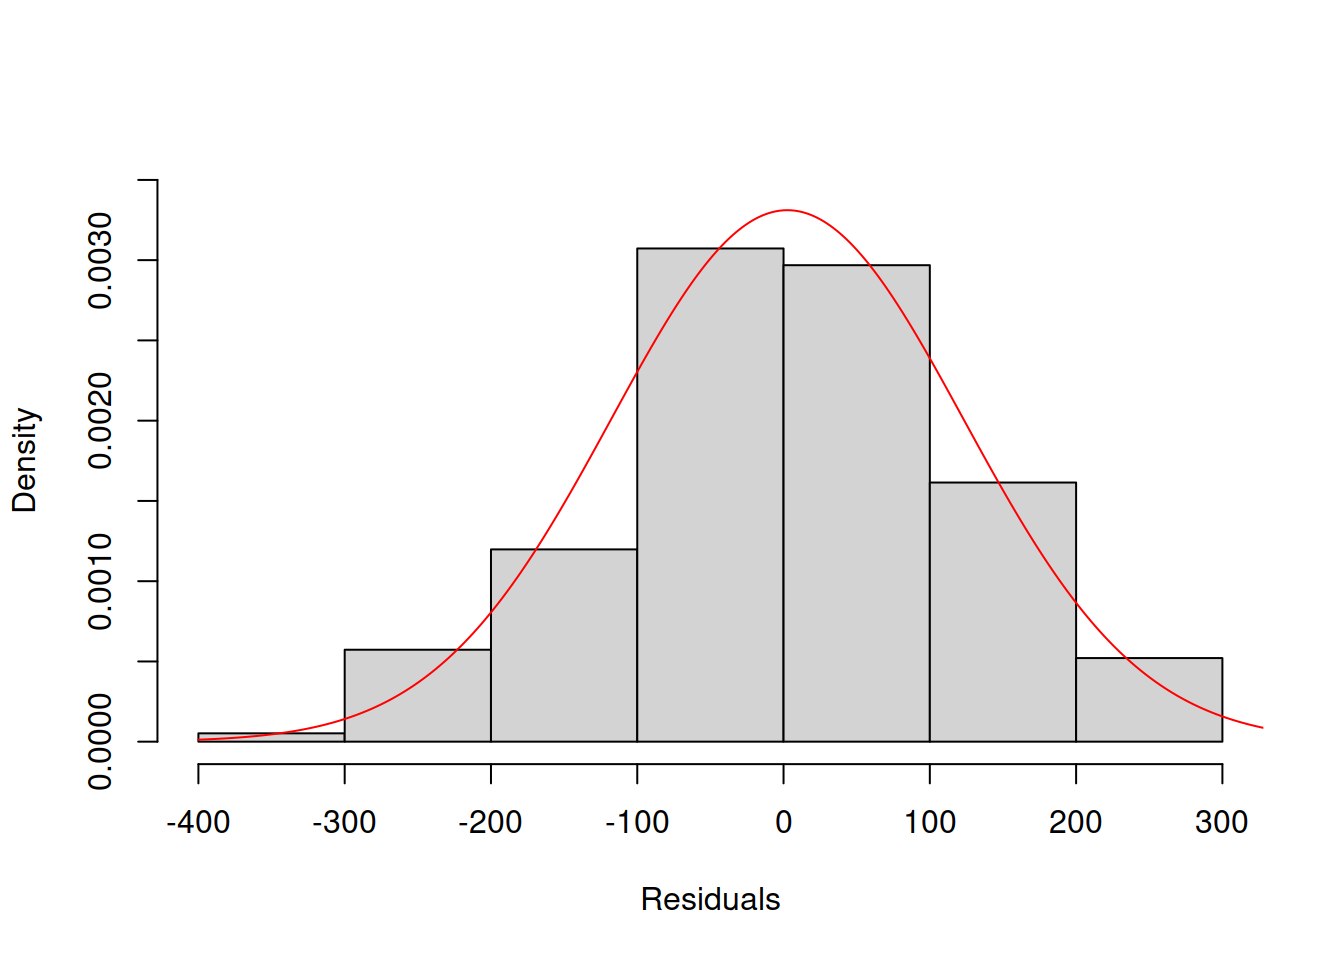 Histogram and density line for the residuals from Model 3 (assumed to follow Normal distribution).